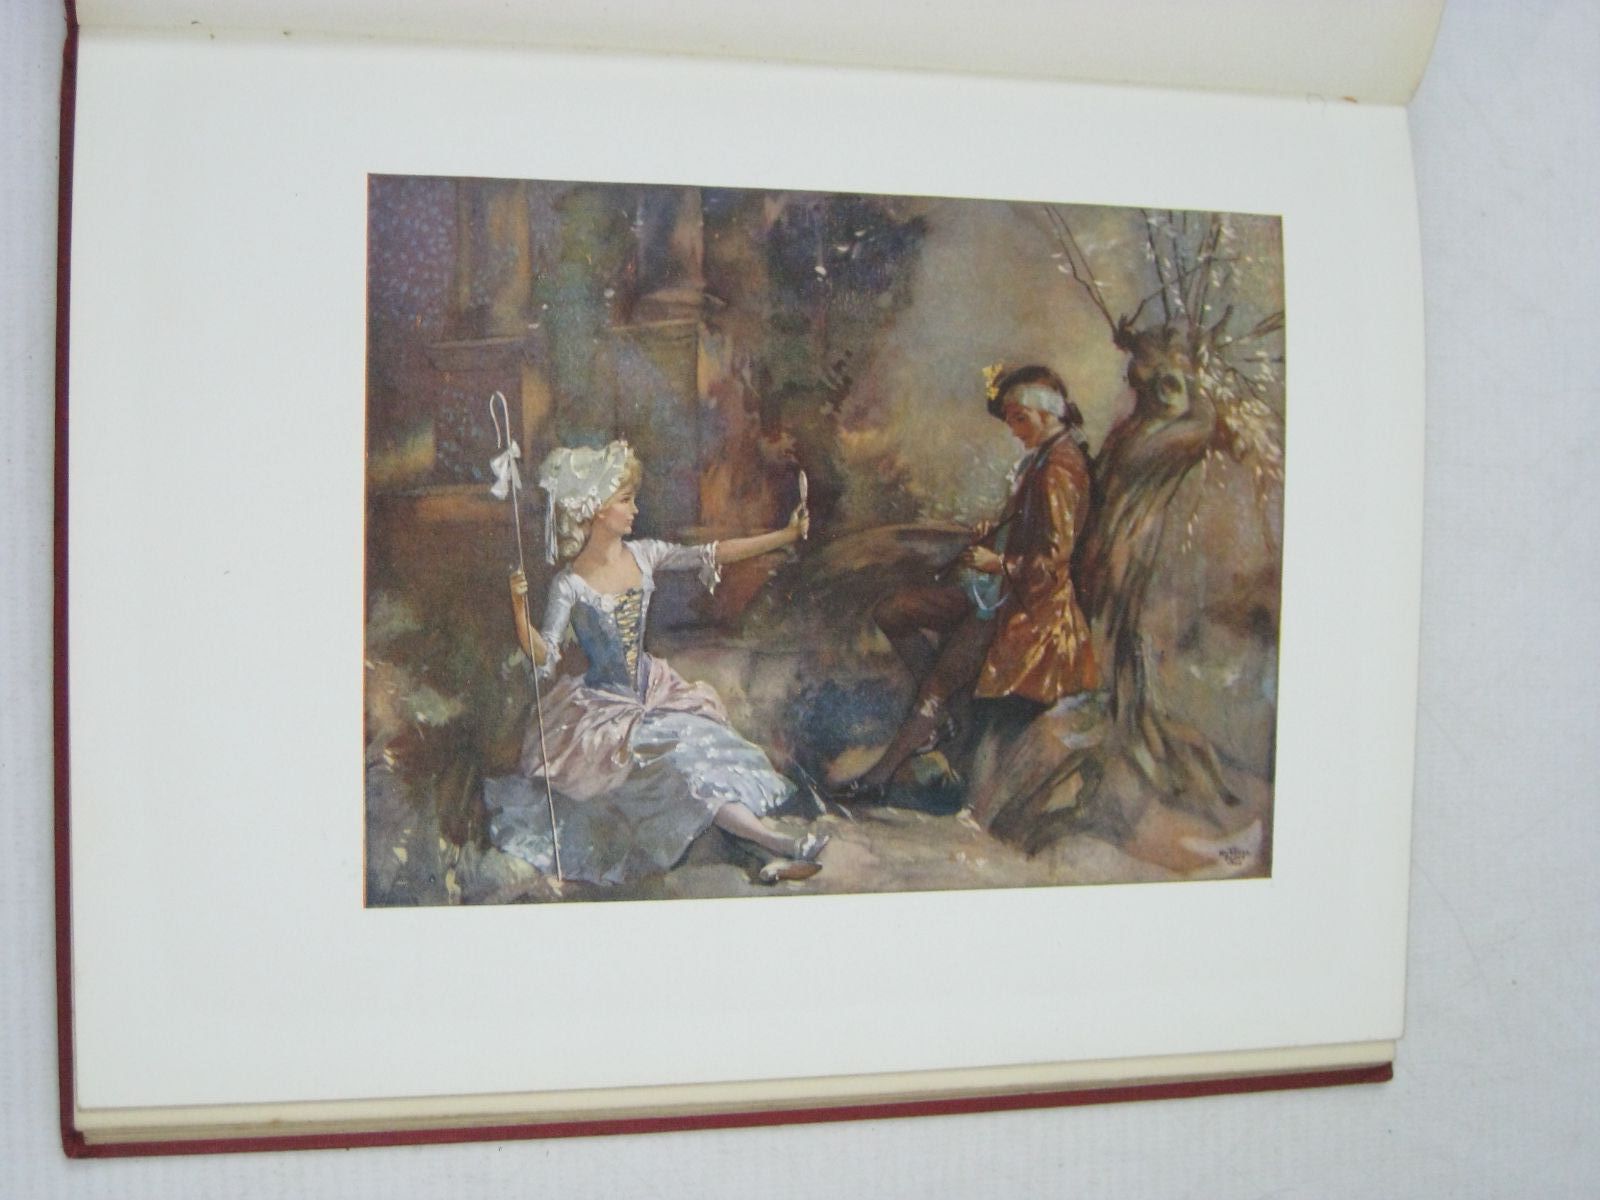 Photo of IOLANTHE written by Gilbert, W.S. illustrated by Flint, William Russell published by G. Bell And Sons, Ltd. (STOCK CODE: 1506024)  for sale by Stella & Rose's Books